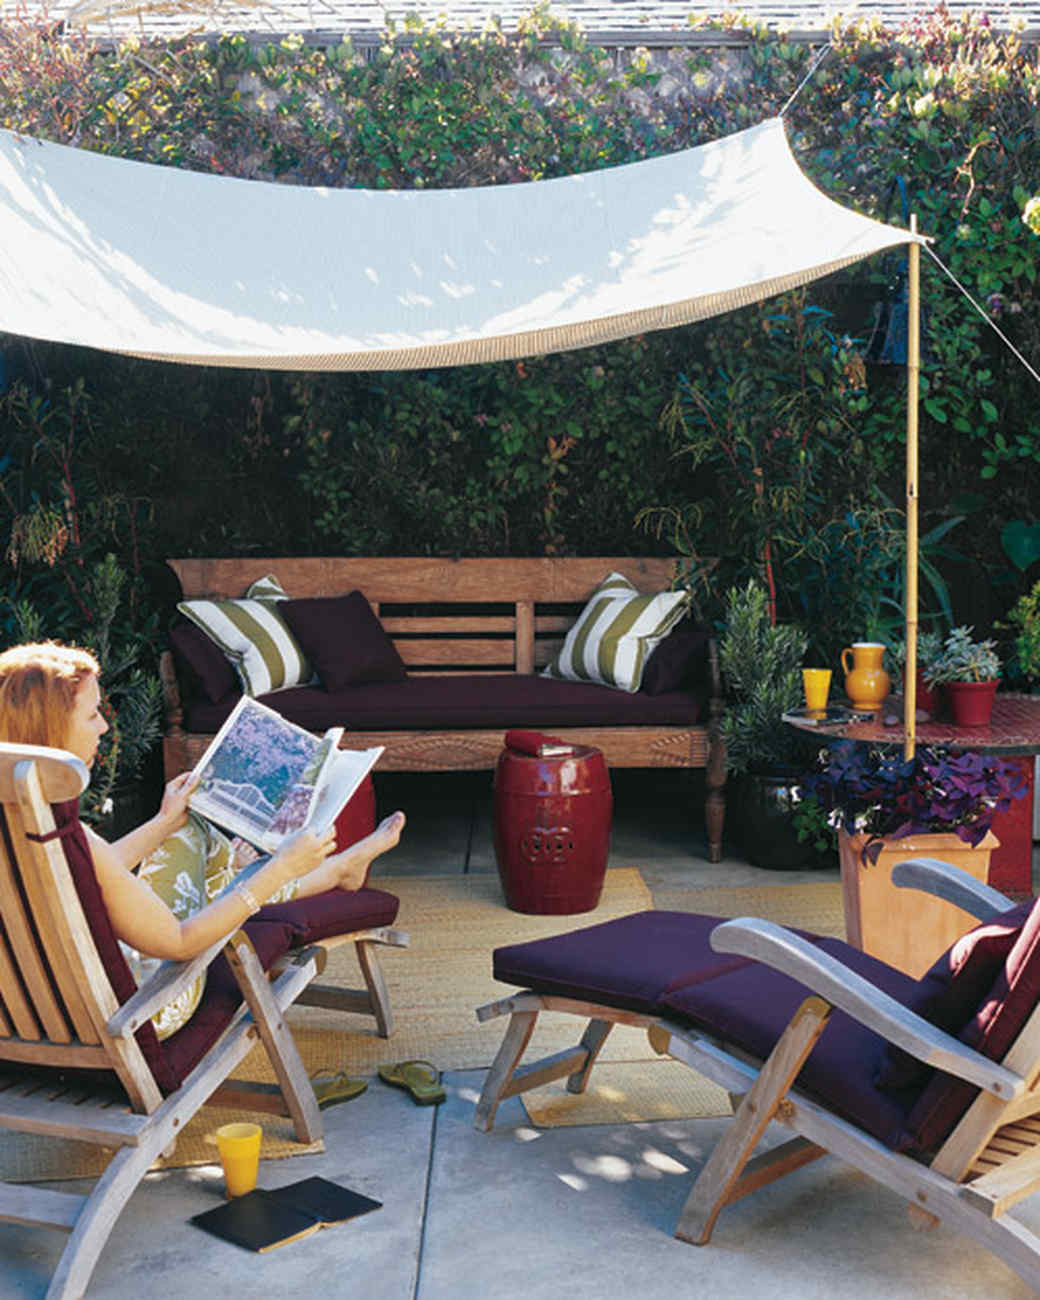 DIY Outdoor Canopy
 A Slice of Shade Creating Canopies